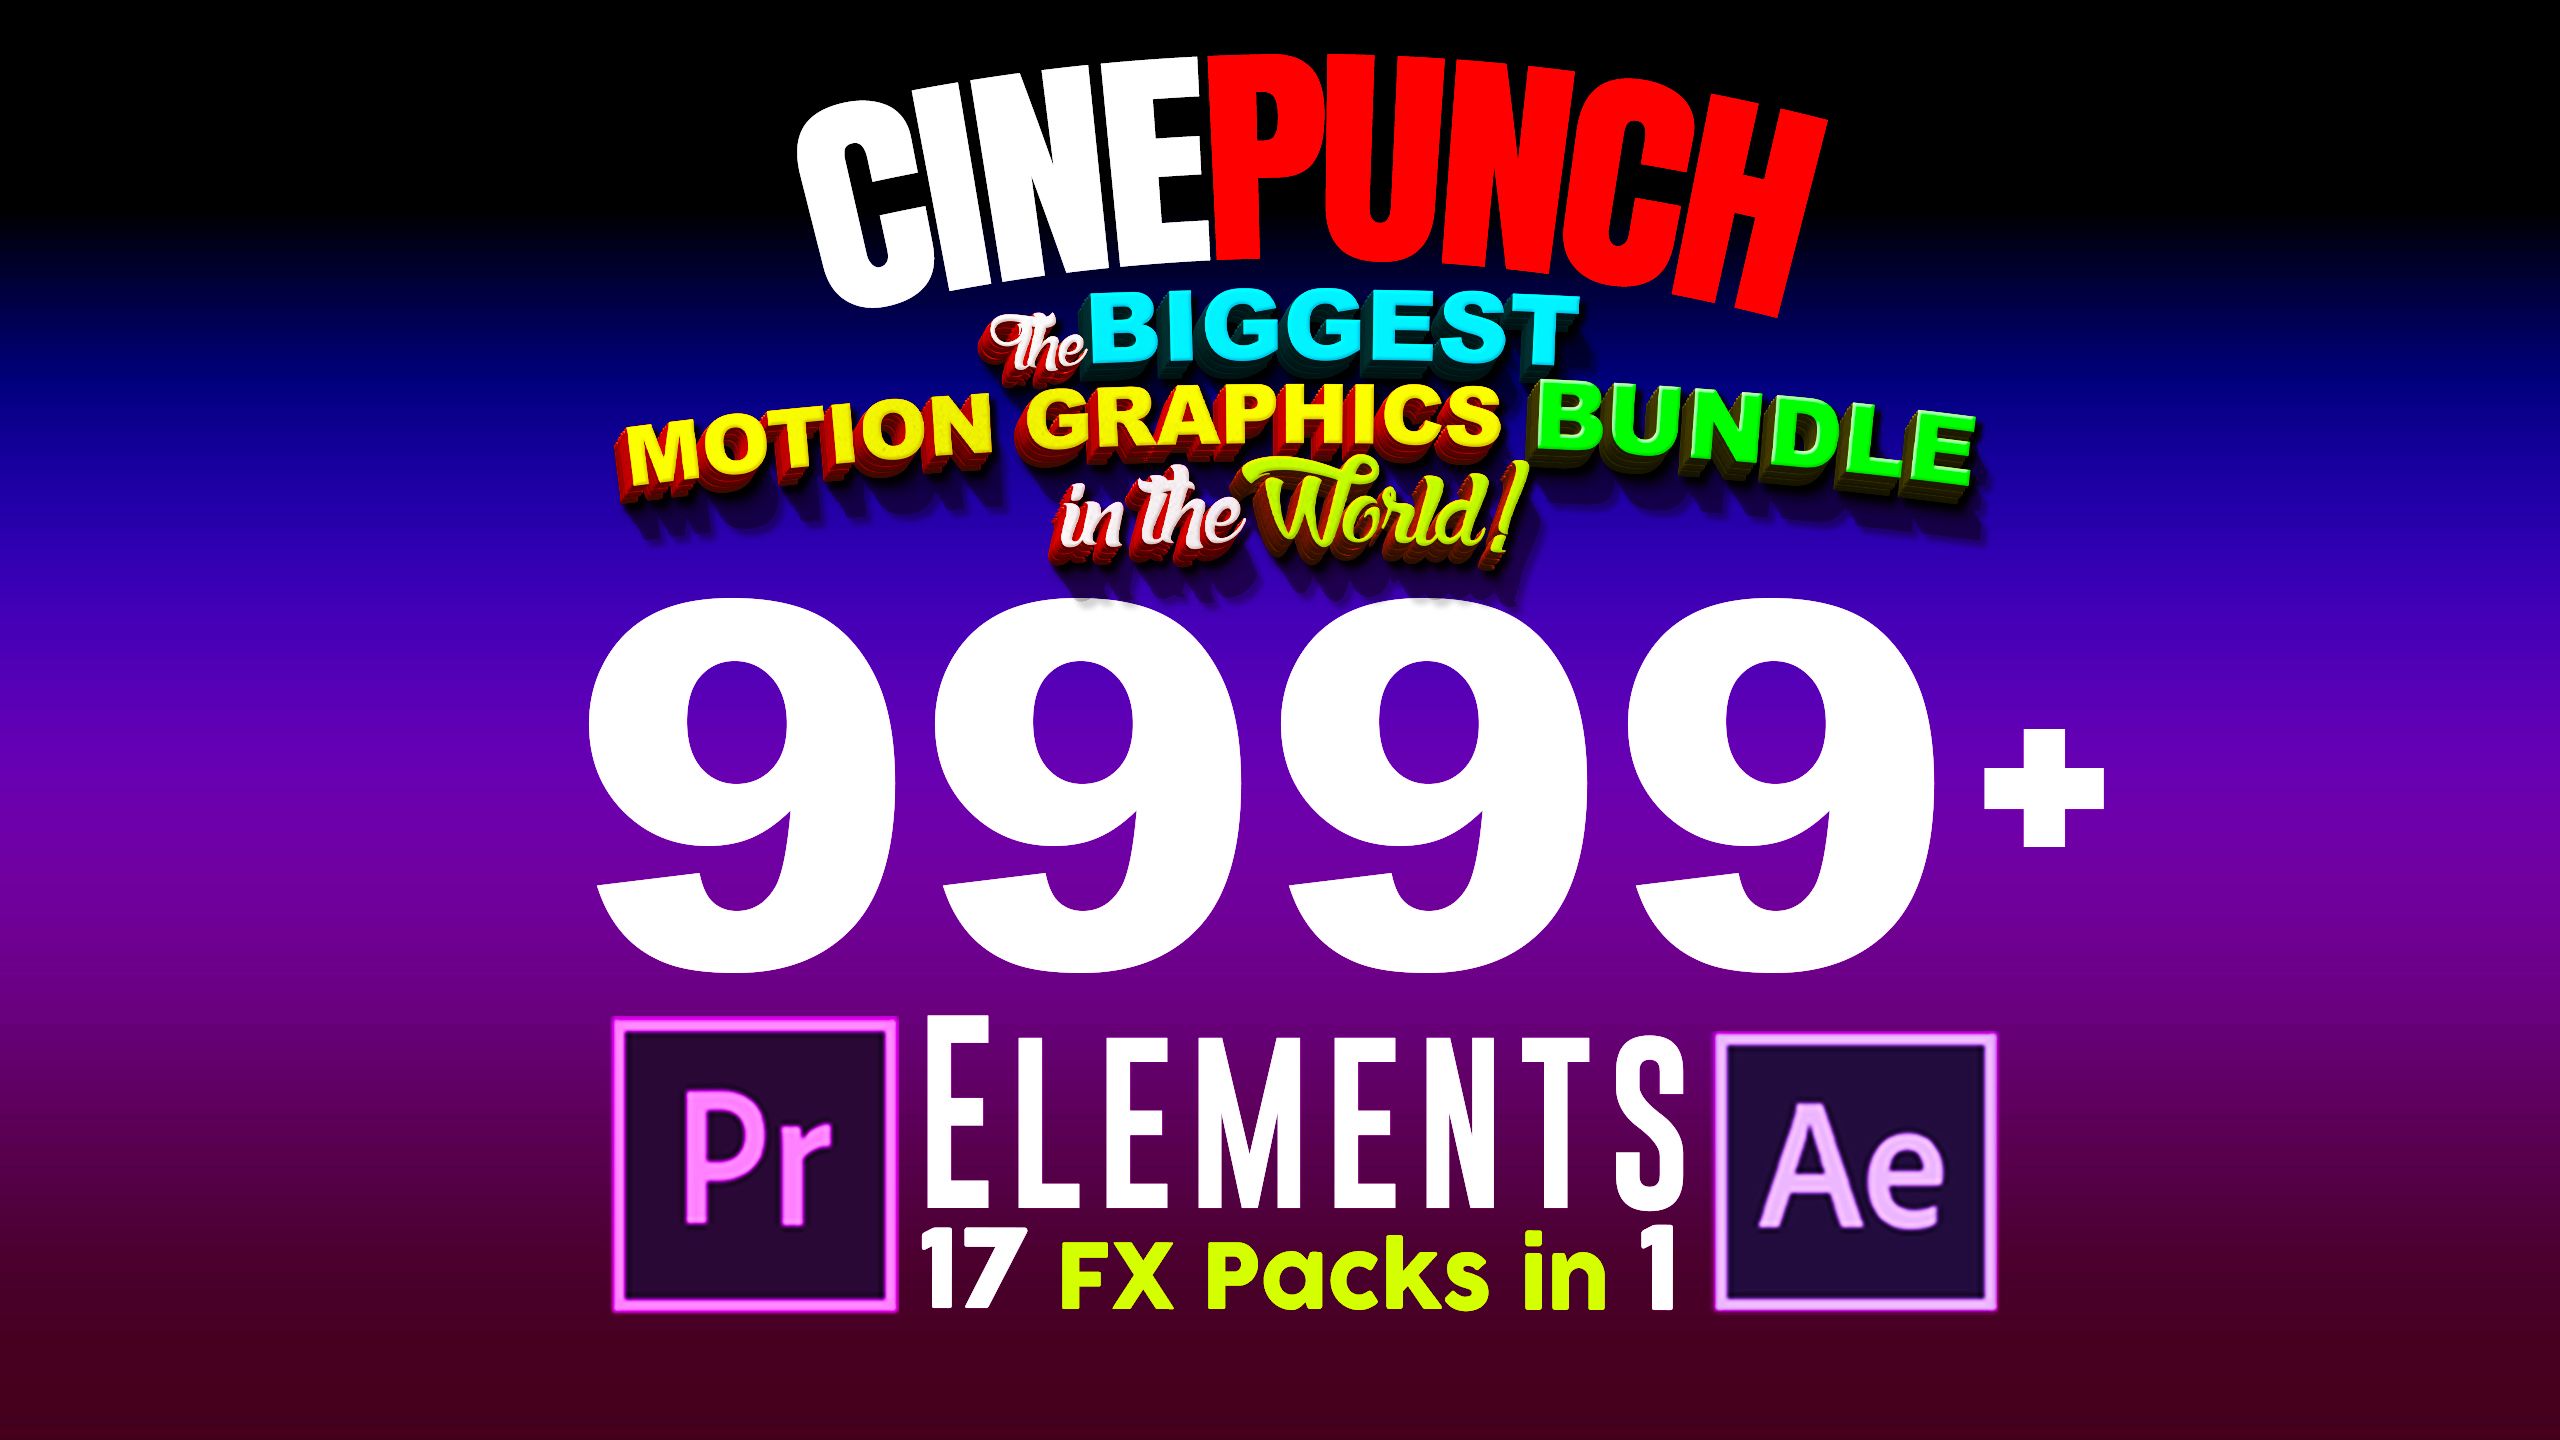 adobe premiere effects pack